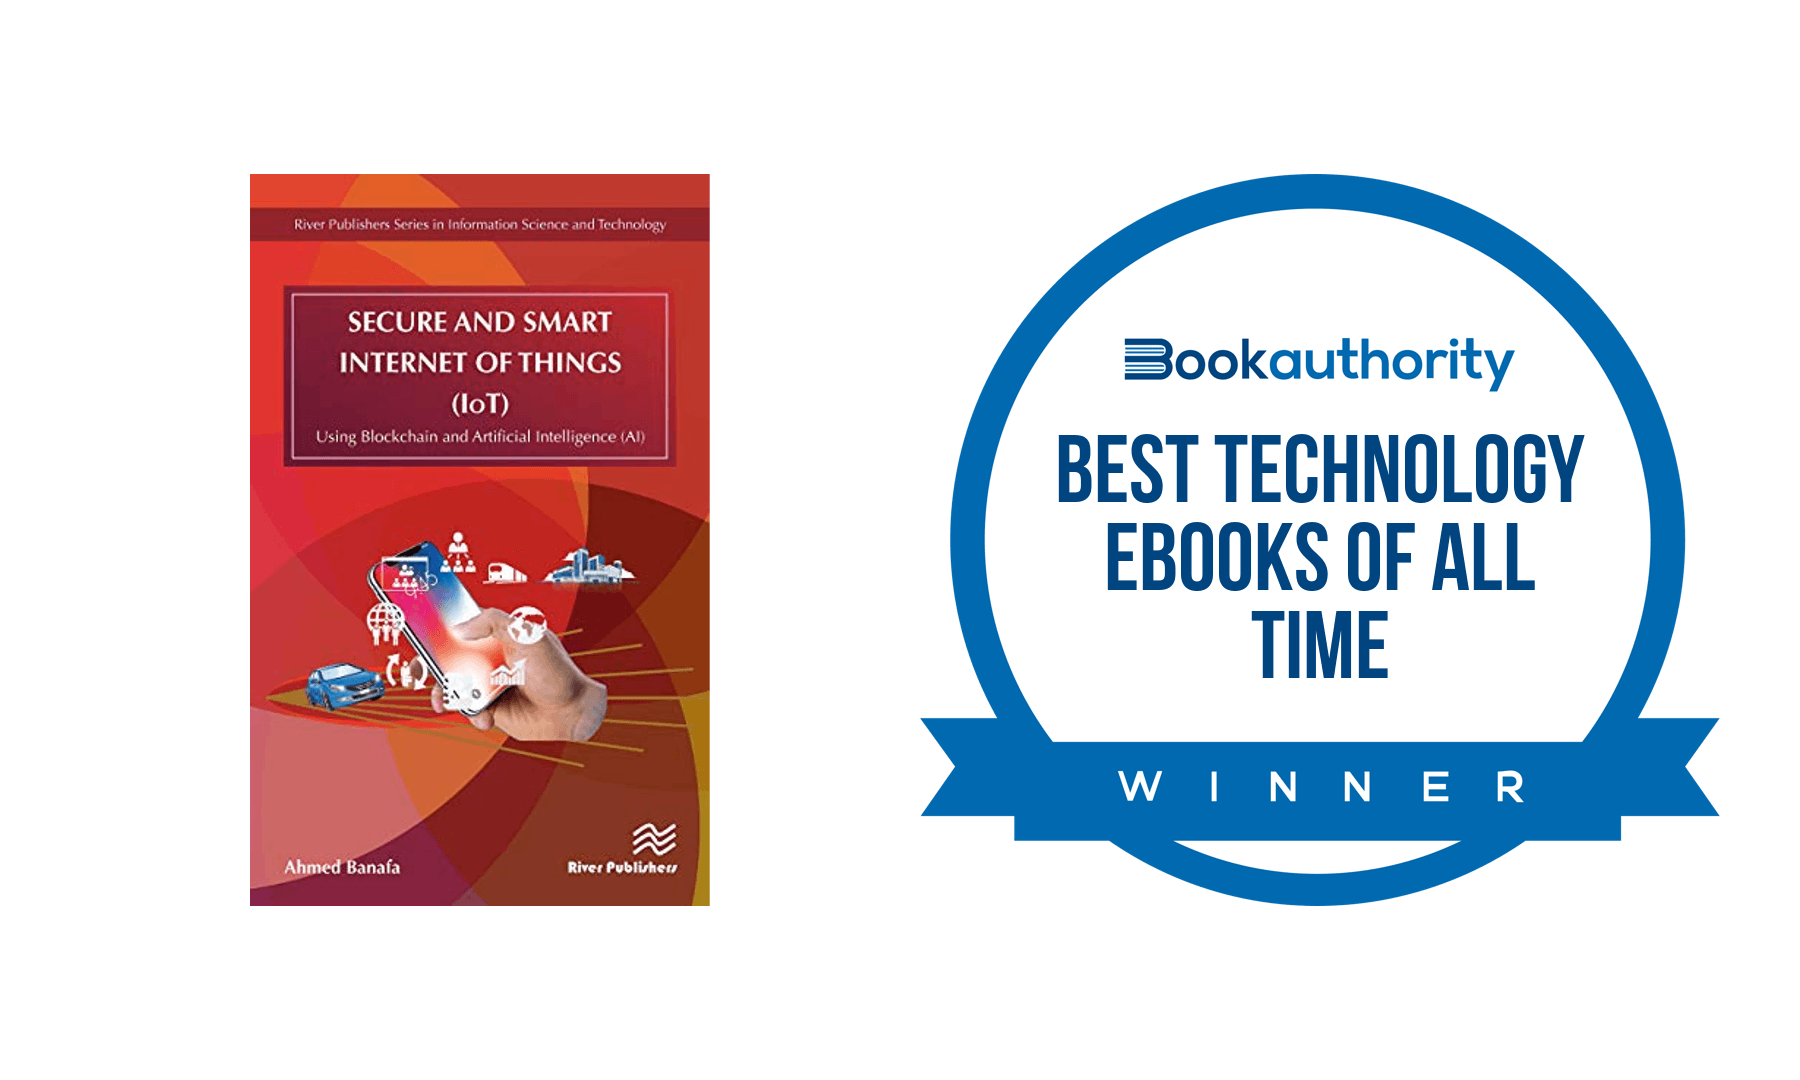 100 Best Technology eBooks of All Time BookAuthority